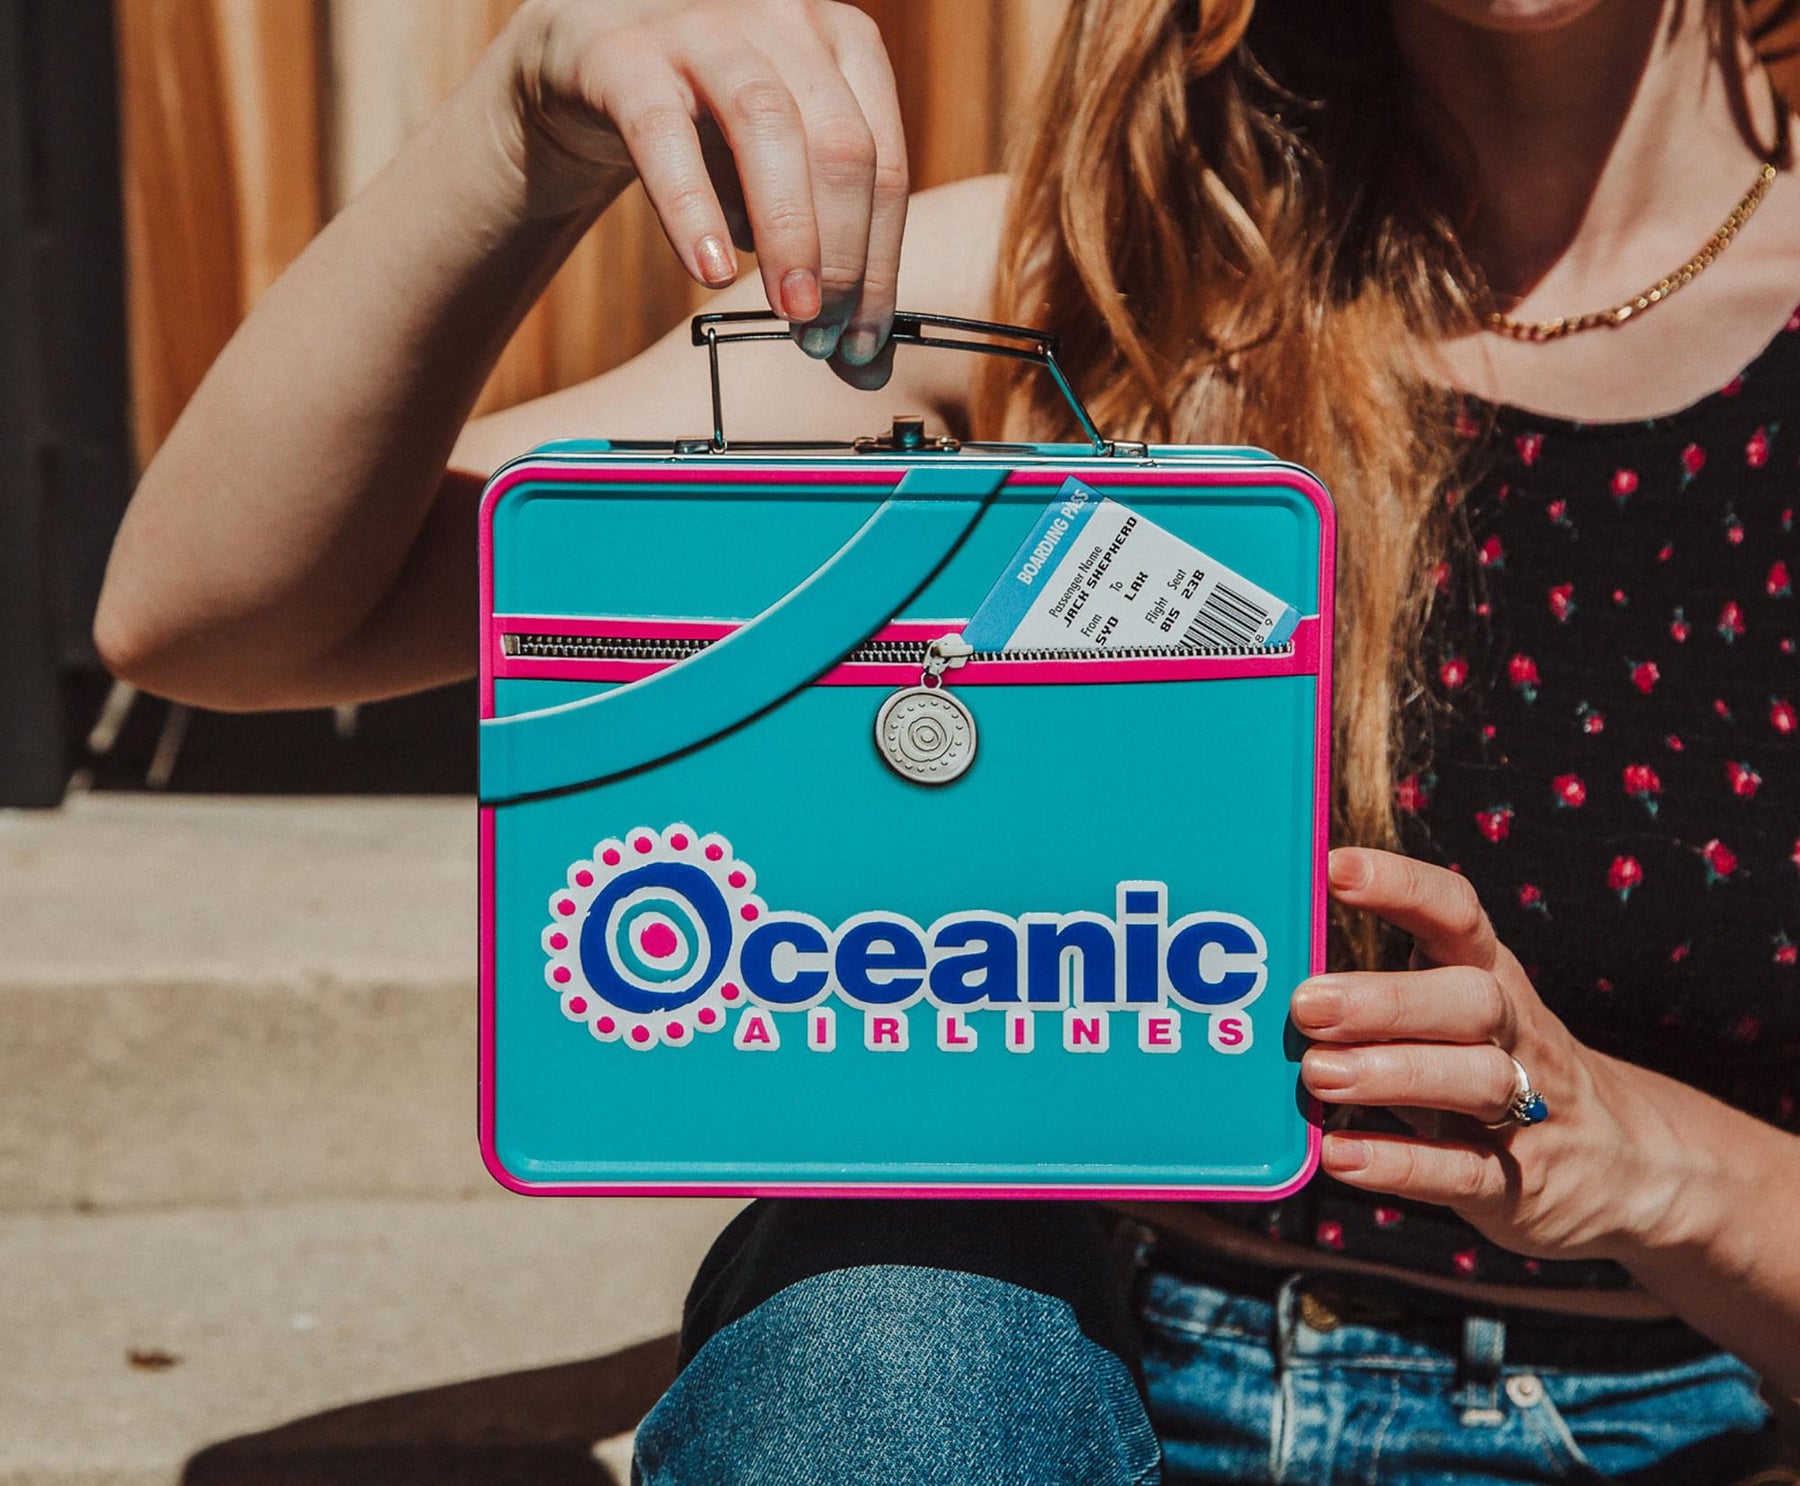 LOST Oceanic Airlines Metal Tin Lunch Box Tote | 8 x 7 x 4 Inches